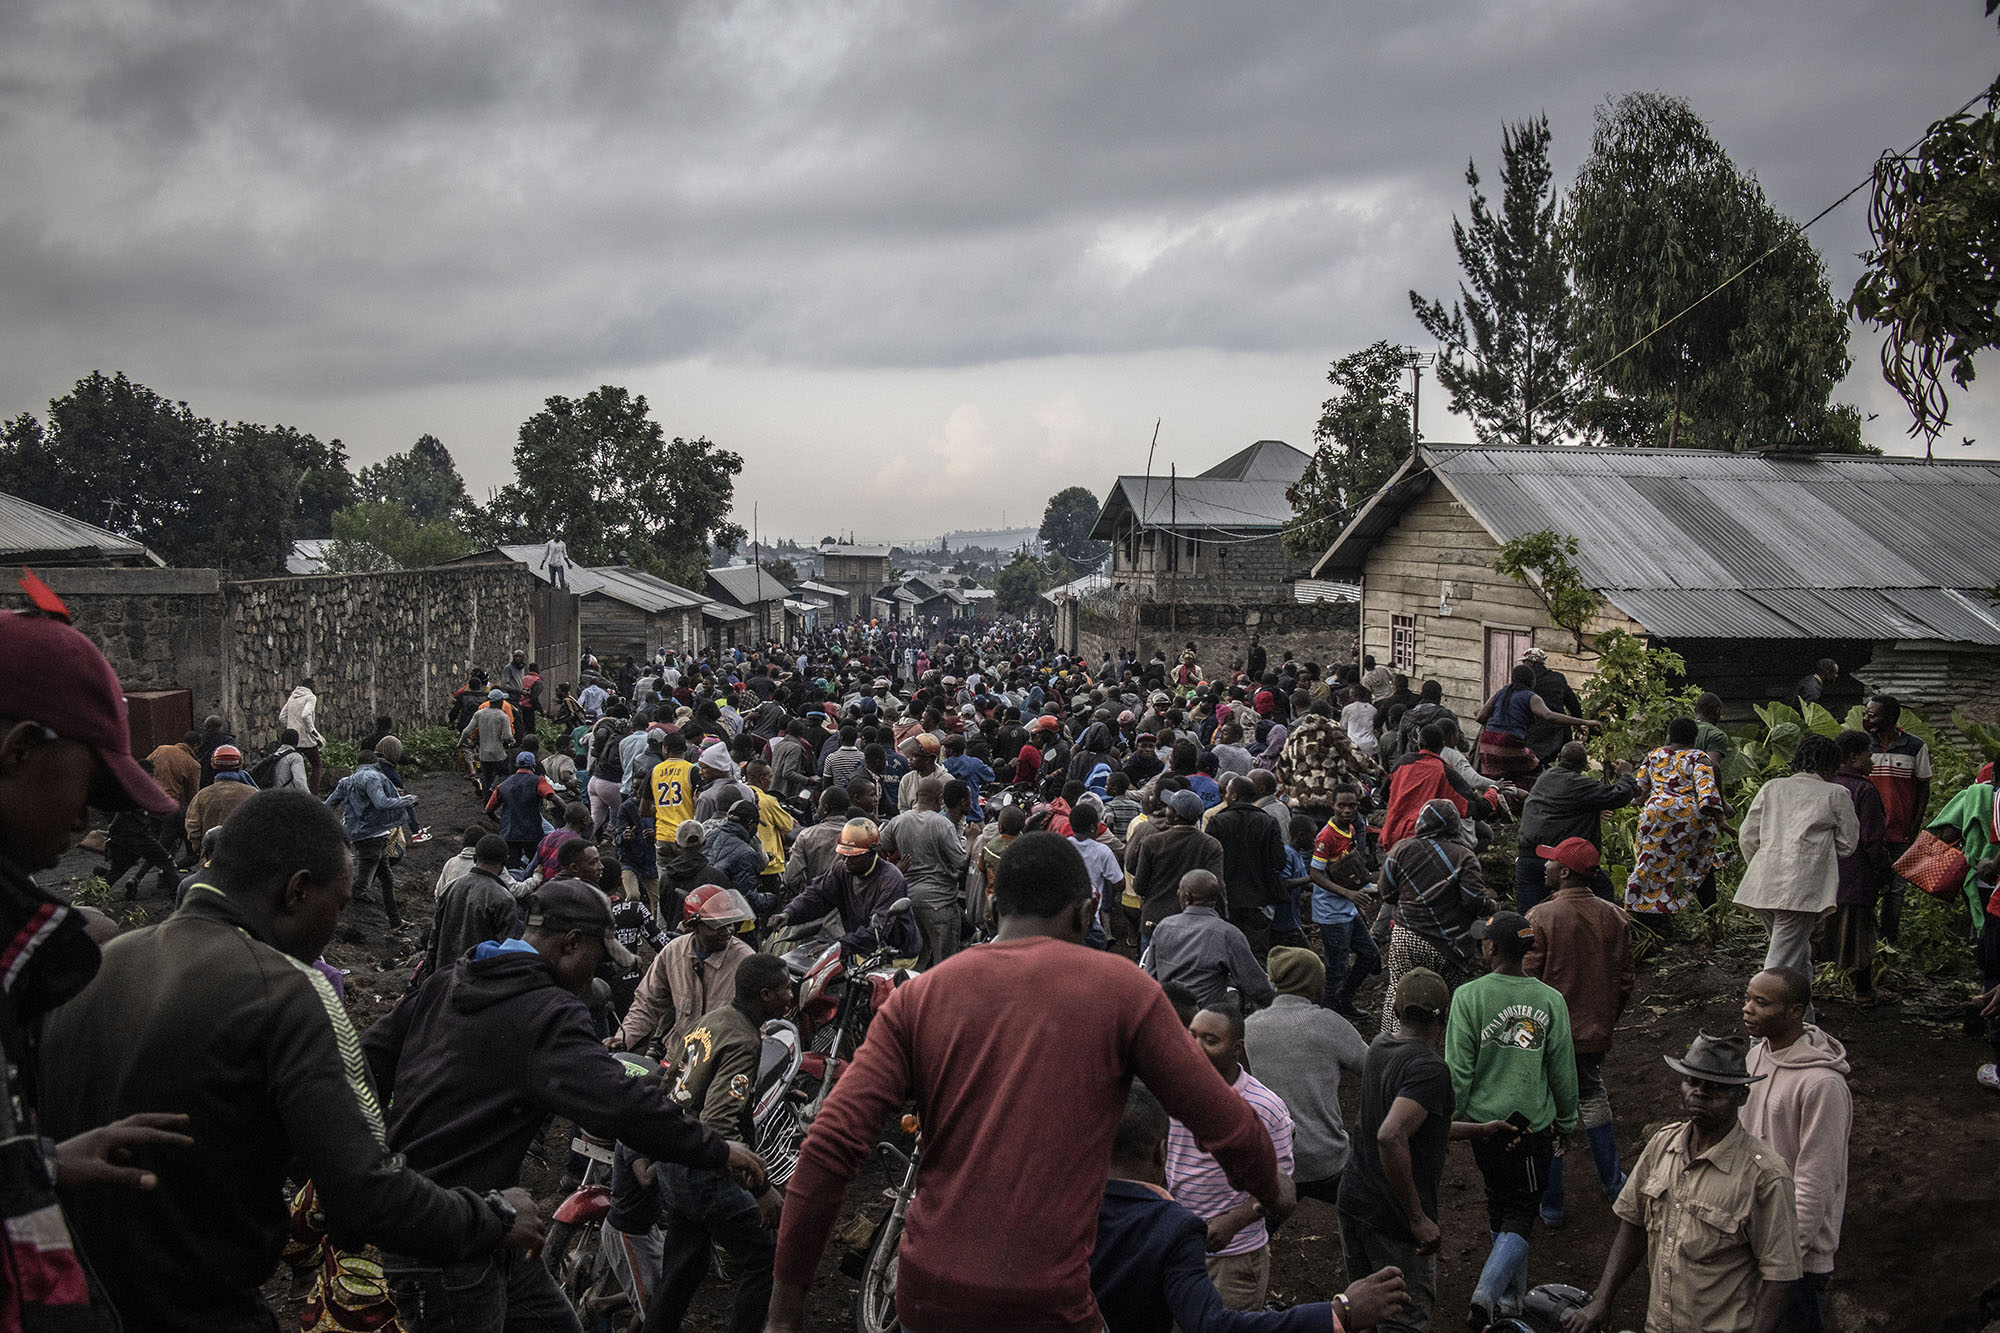 Goma, North Kivu Province, May 22, 2021. People Run In A Moment Of Panic During A Minor Earthquake The Morning After Mount Nyiragongo Erupted For The First Time In Nearly Two Decades © Finbarr O'reilly For Fondation Carmignac